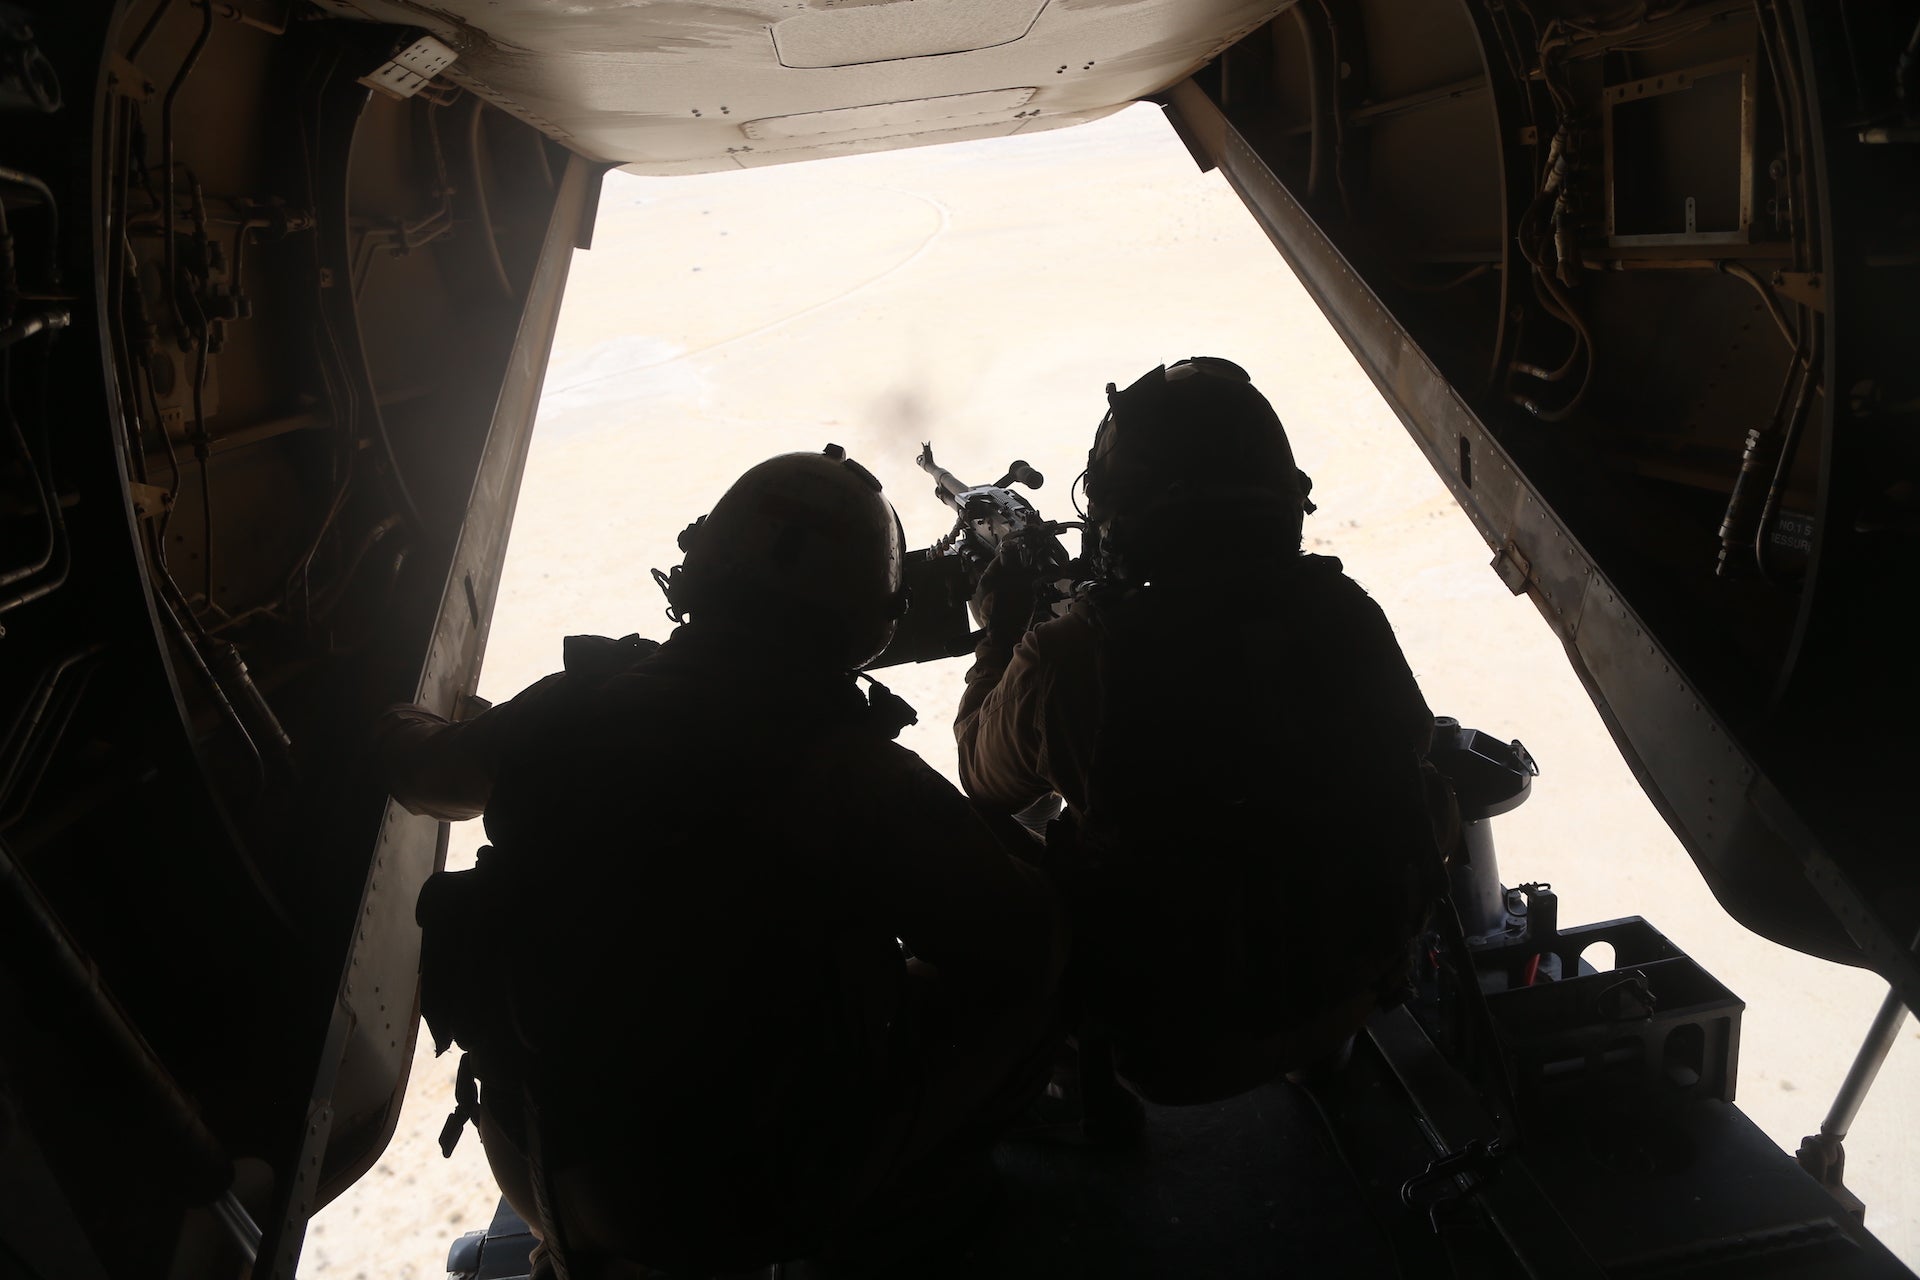 U.S. Marine Corps Sgt. Daniel Pacheco, left, and Cpl. Jared Arnold, right, crew chiefs with Marine Medium Tiltrotor Squadron 265, Marine Aircraft Group 36, 1st Marine Aircraft Wing, fire an M240D machine gun from the back of an MV-22B Osprey aircraft, during a tail gunnery certification in support of Weapons and Tactics Instructor (WTI) course 1-21 in Yuma, Arizona, Oct. 6, 2020. The WTI course is a seven-week training event hosted by Marine Aviation Weapons and Tactics Squadron One, providing standardized advanced tactical training and certification of unit instructor qualifications to support Marine aviation training and readiness, and assists in developing and employing aviation weapons and tactics. (U.S. Marine Corps photo by Cpl. KarlHendrix Aliten)